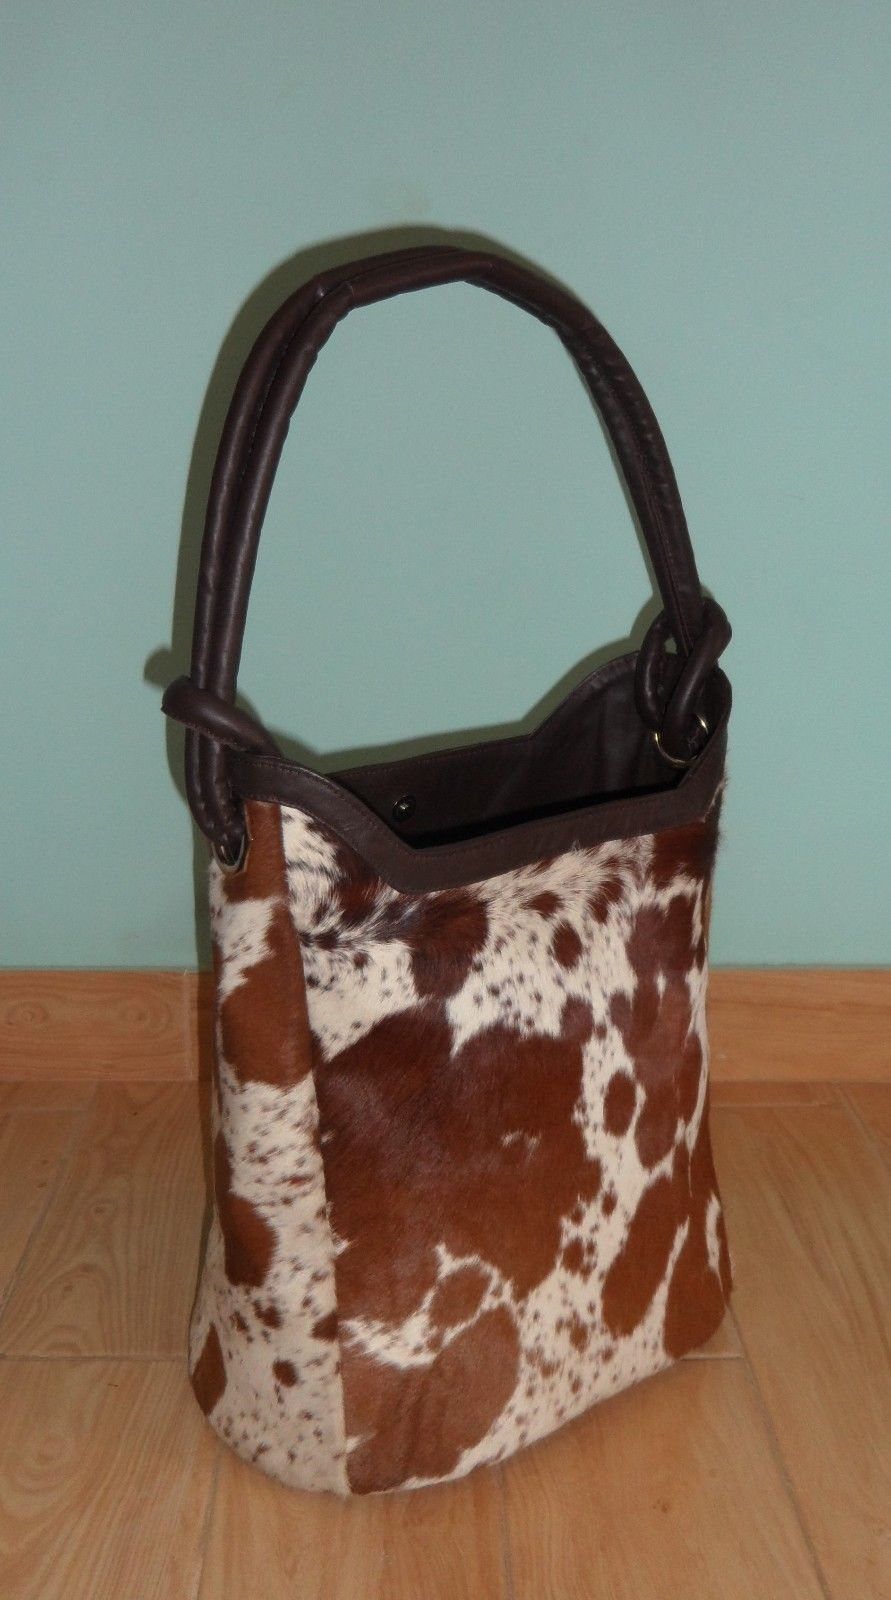 These beautiful and exotic cowhide bags are perfect for adding a touch of style to any outfit. Whether you’re heading to the office or going out for drinks with friends,